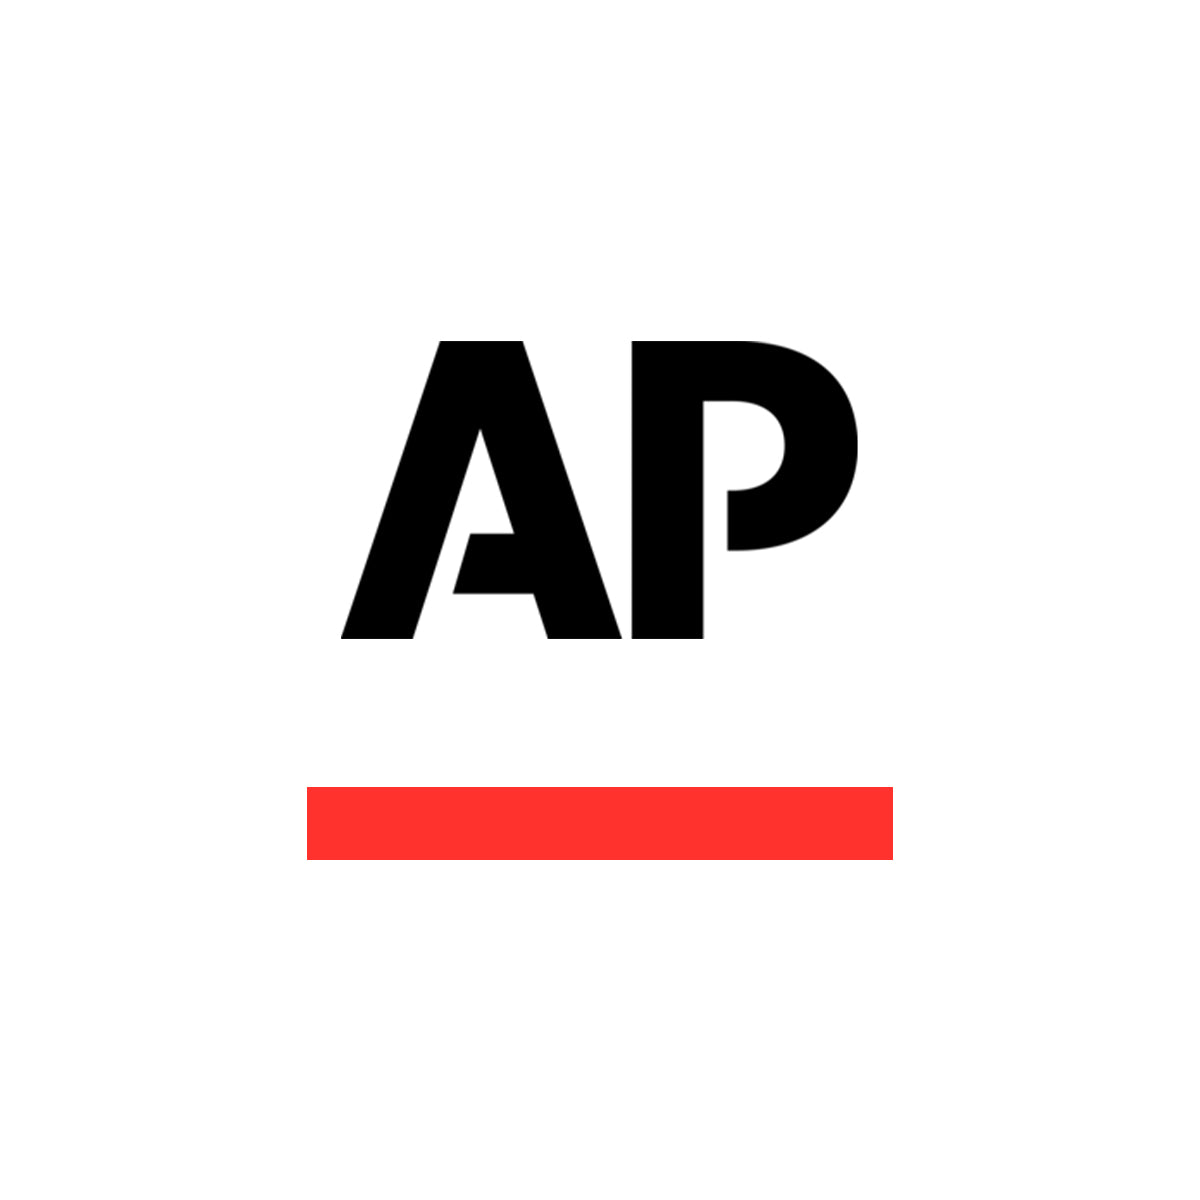 FEATURED ON AP NEWS